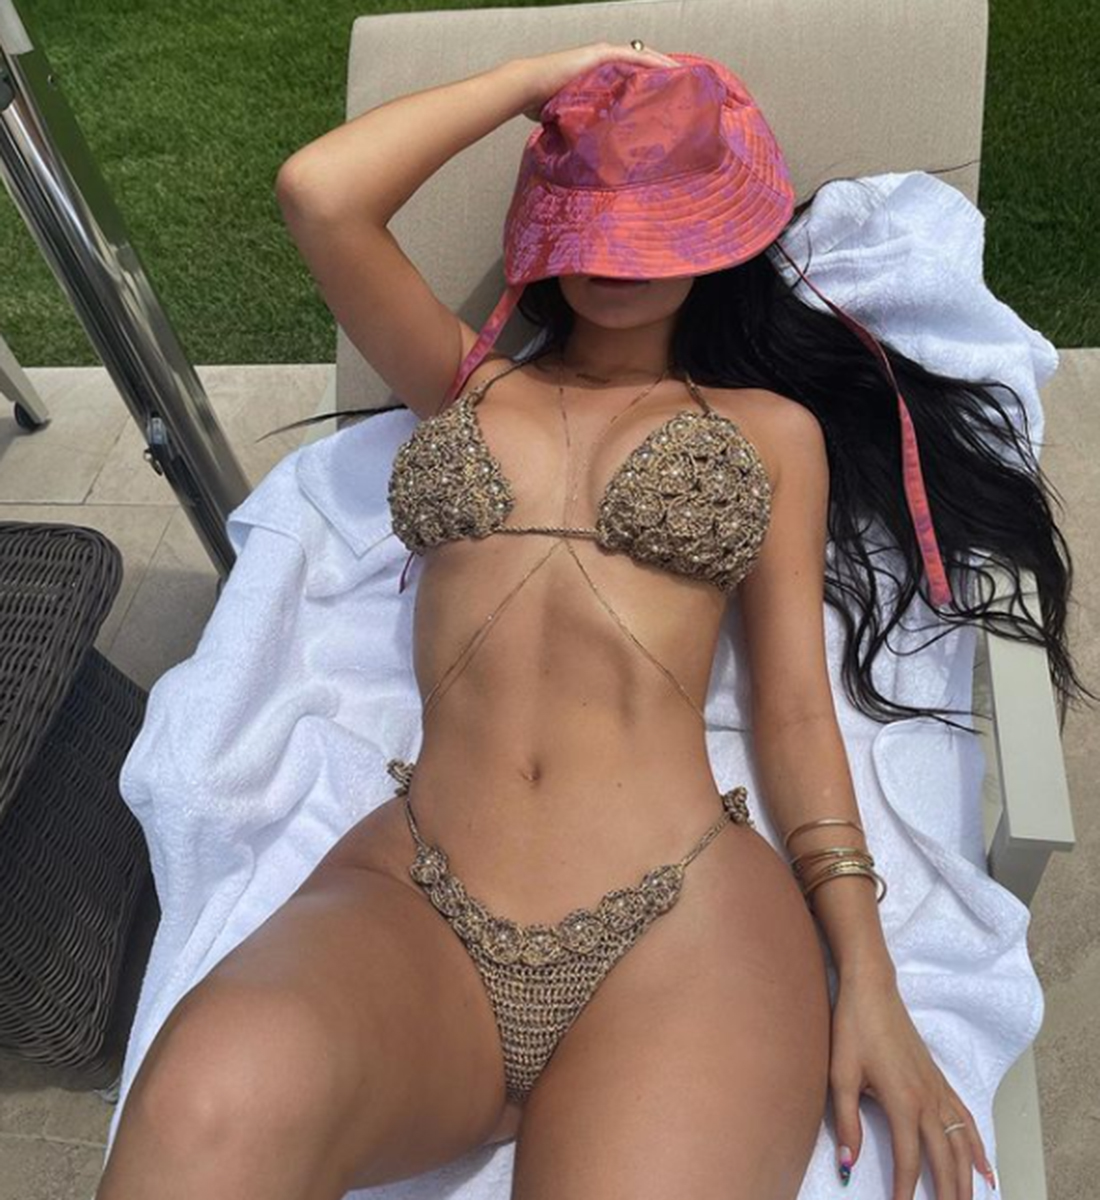 Kylie πη struck again with outrageously revealing photos! 21